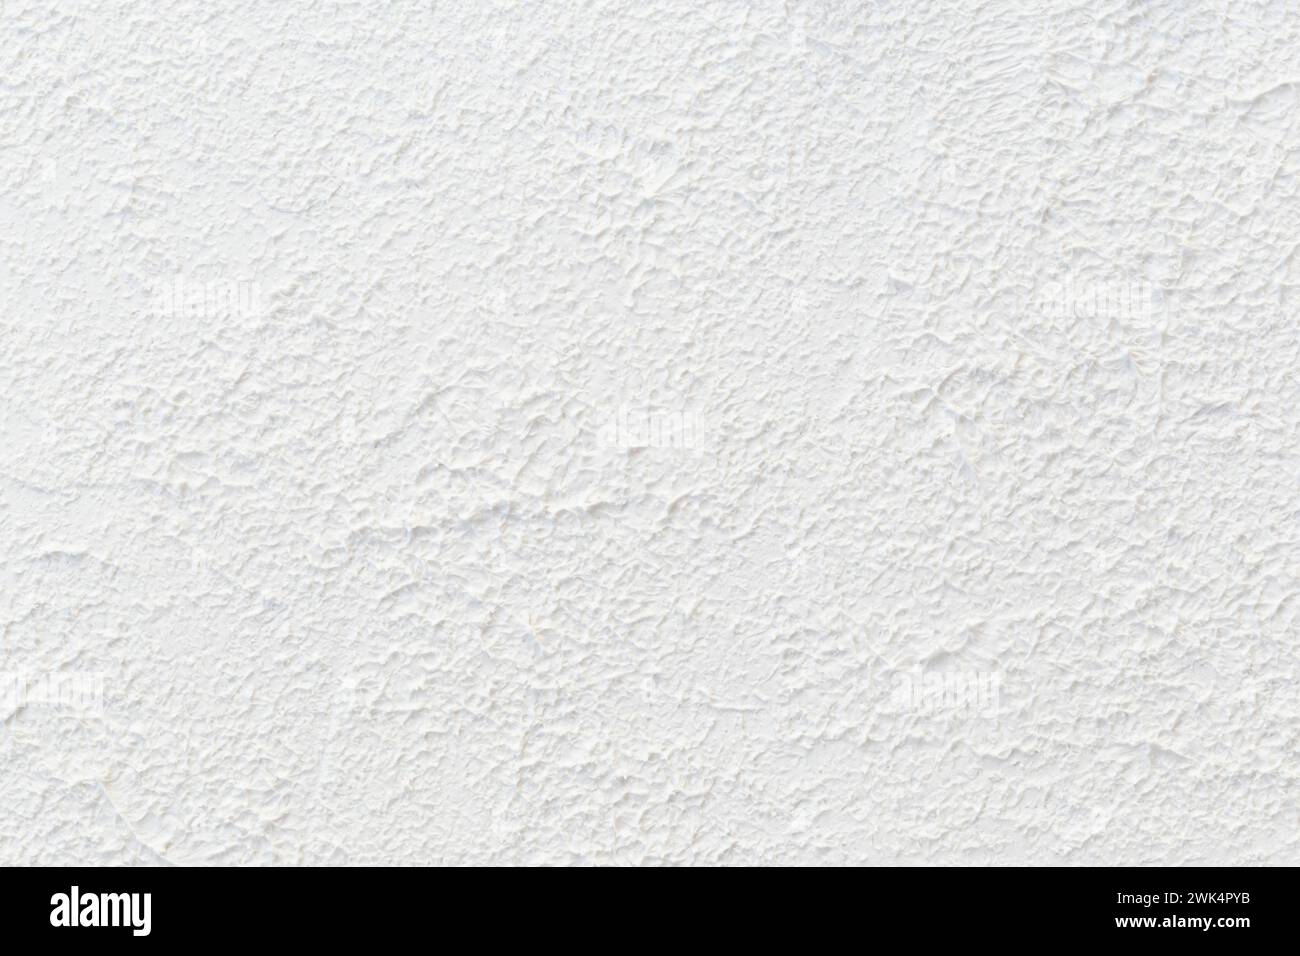 Close-up of abstract white uneven and rough surface. High resolution full frame textured background, copy space. Stock Photo